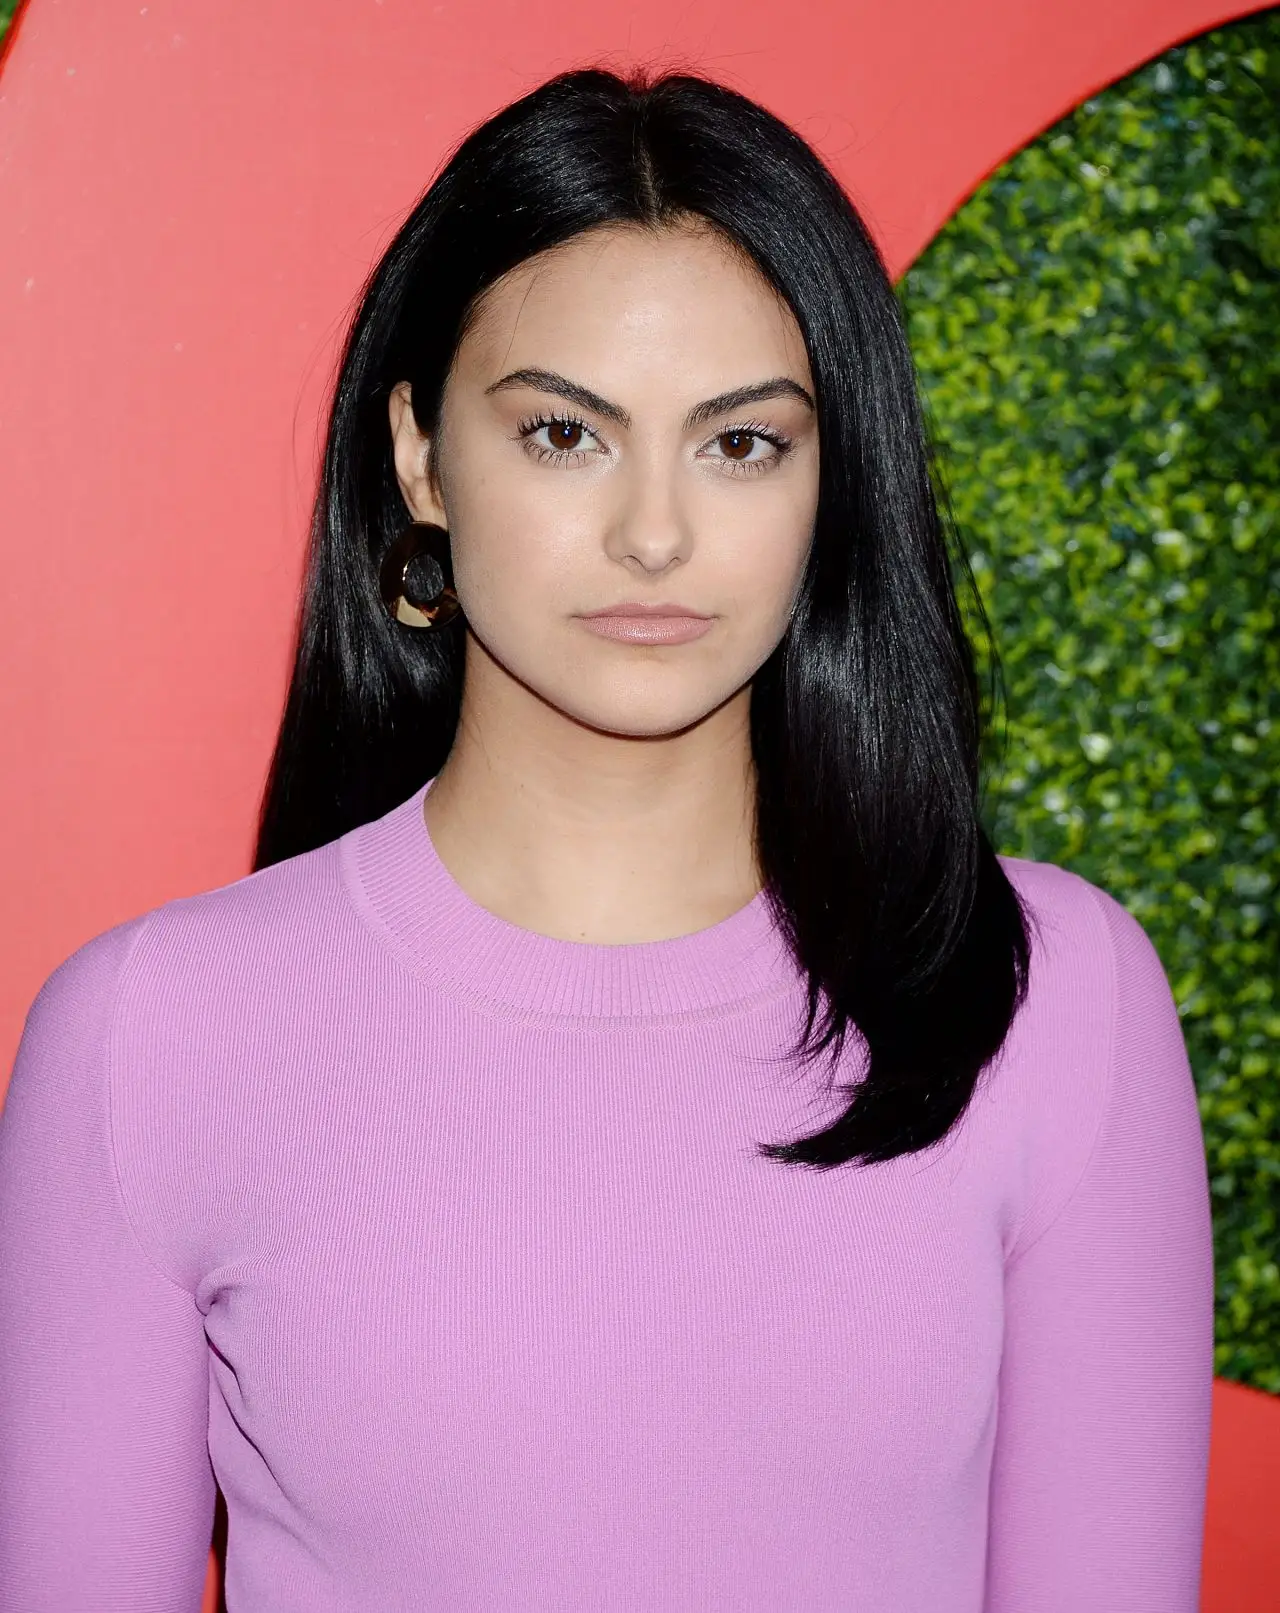 CAMILA MENDES AT 2018 GQ MEN OF THE YEAR PARTY IN LOS ANGELES5